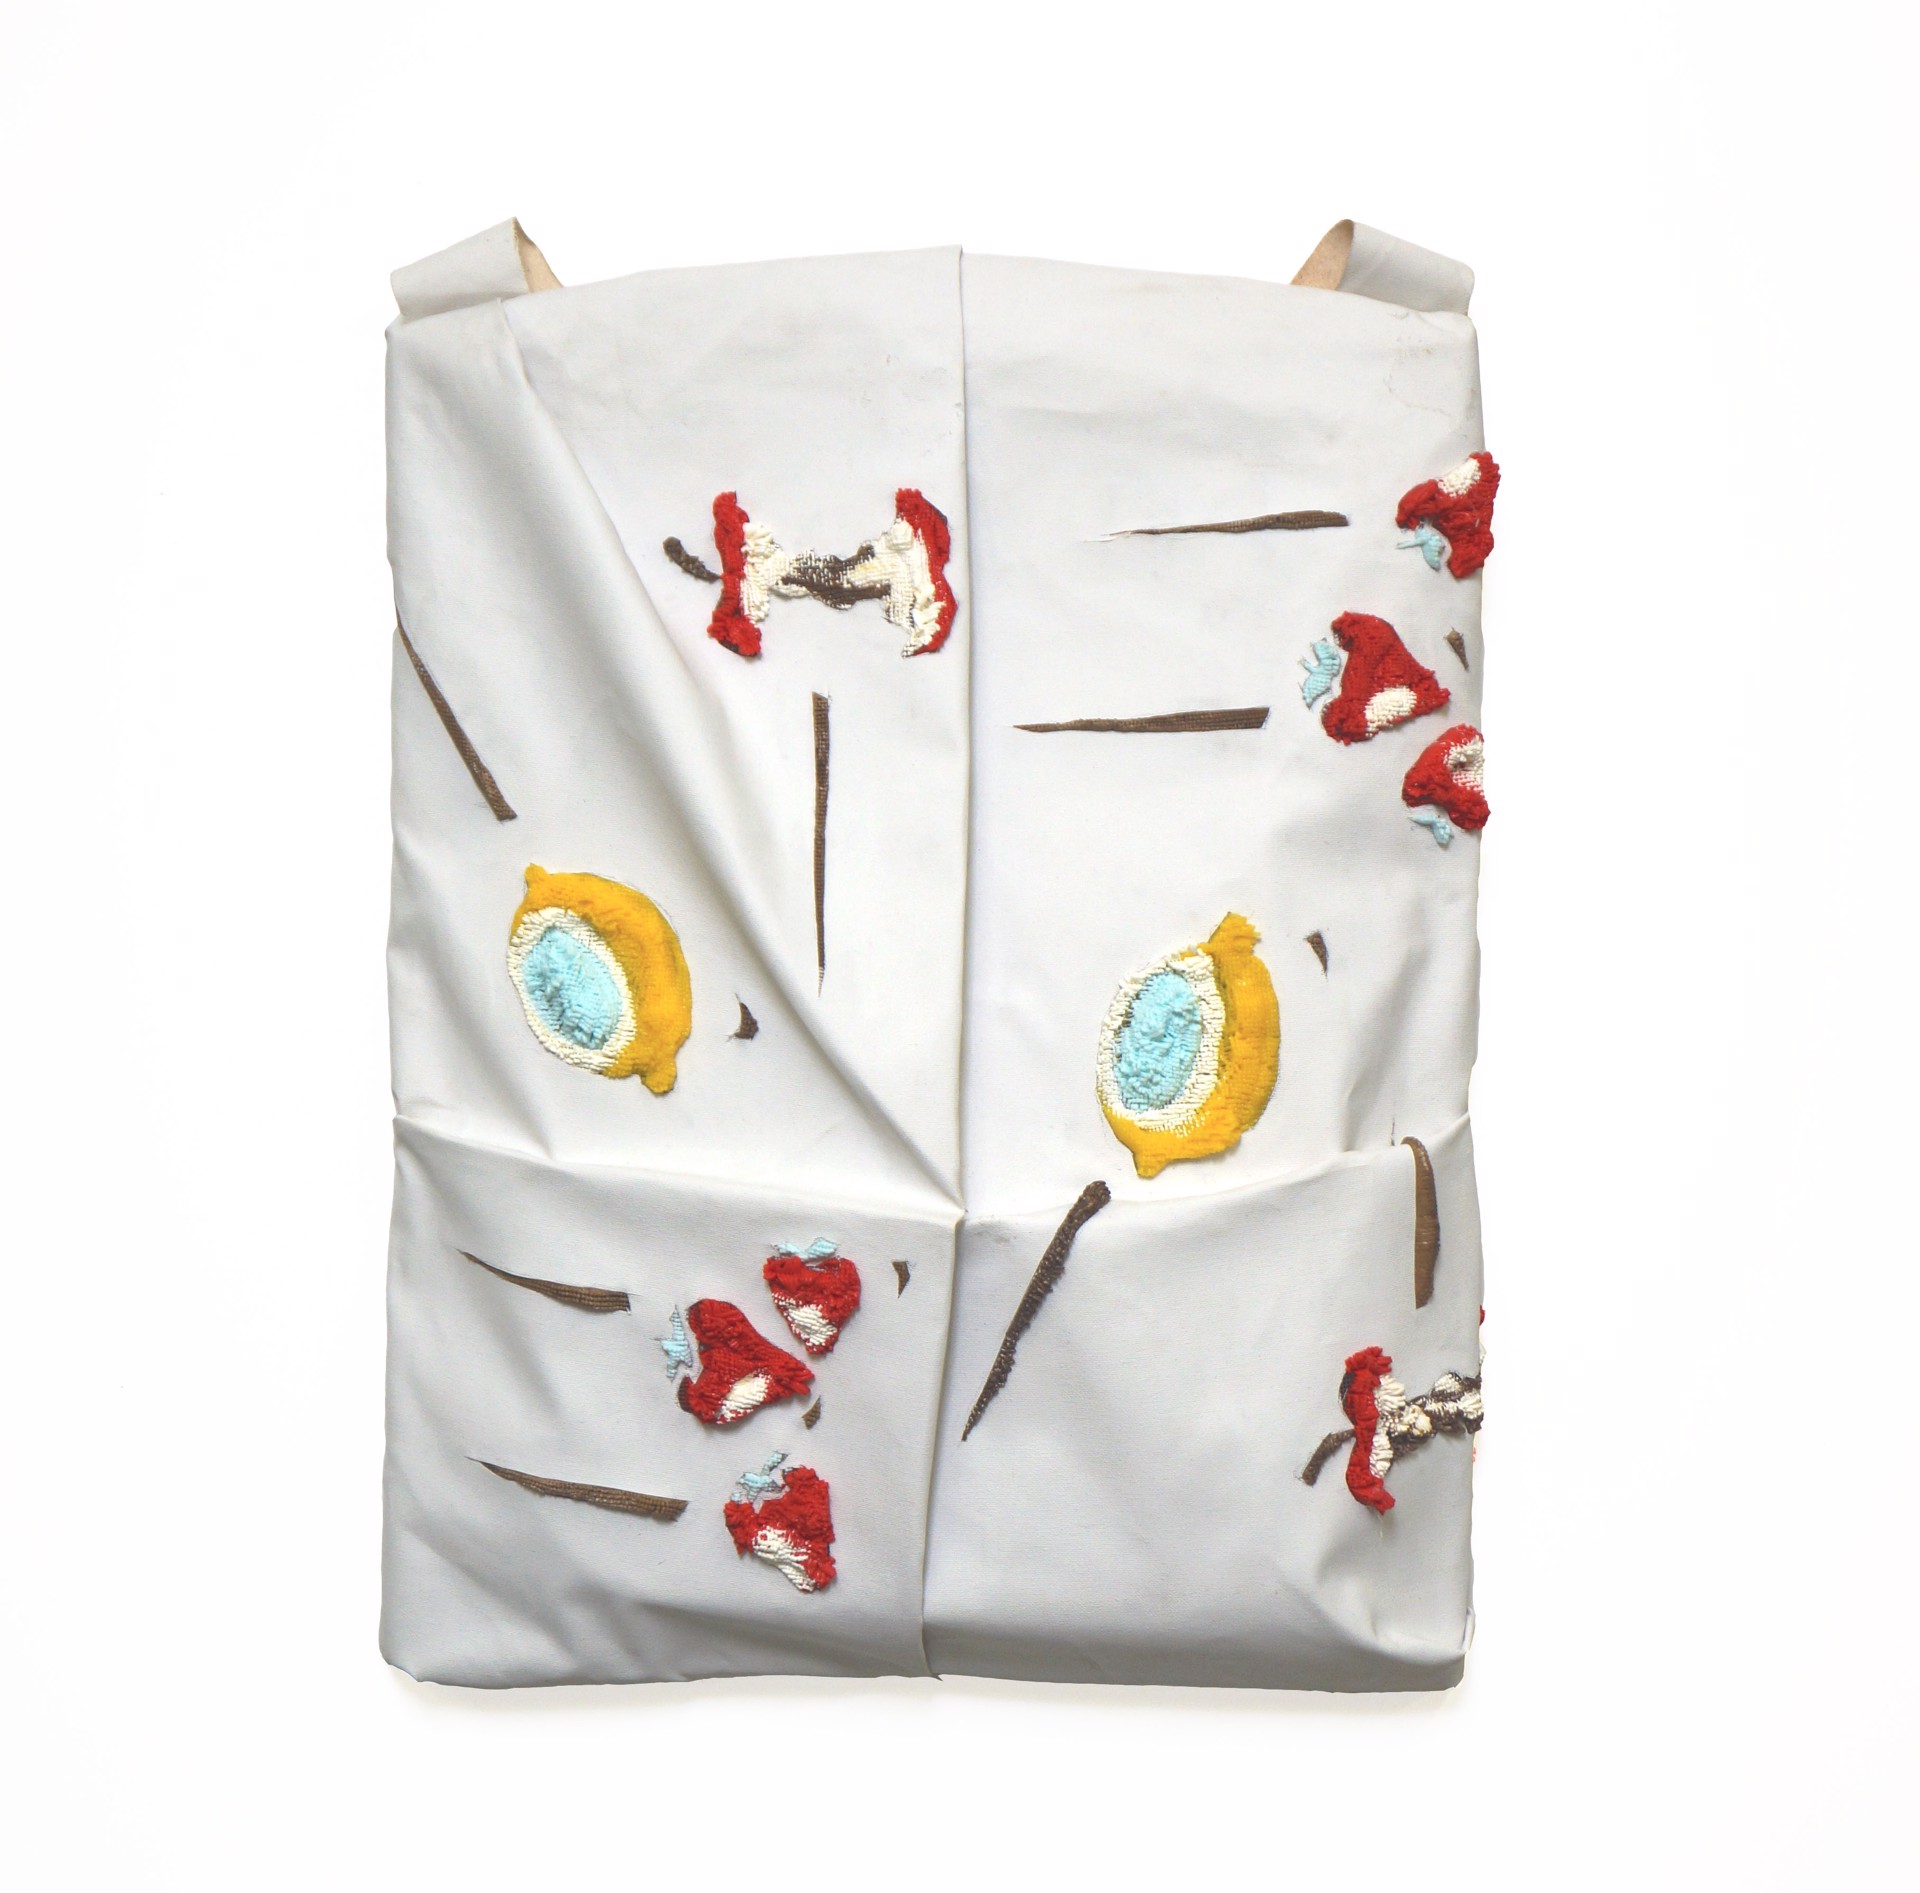 Quadrant Backpack with Rotting Strawberries by Eleanor Aldrich